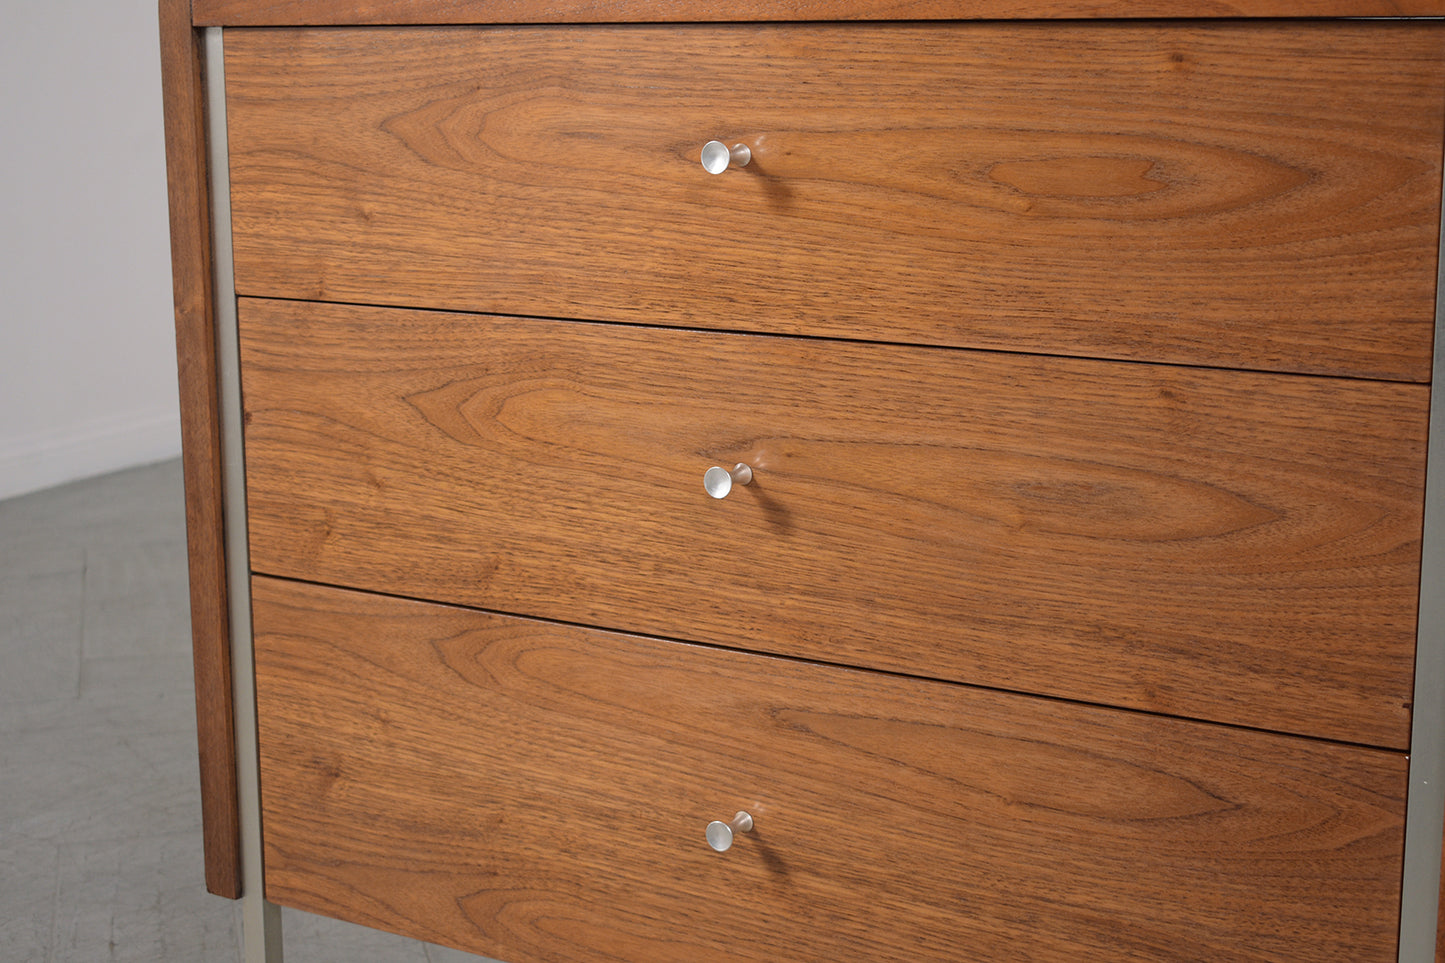 1960s Handcrafted Walnut Chest of Drawers